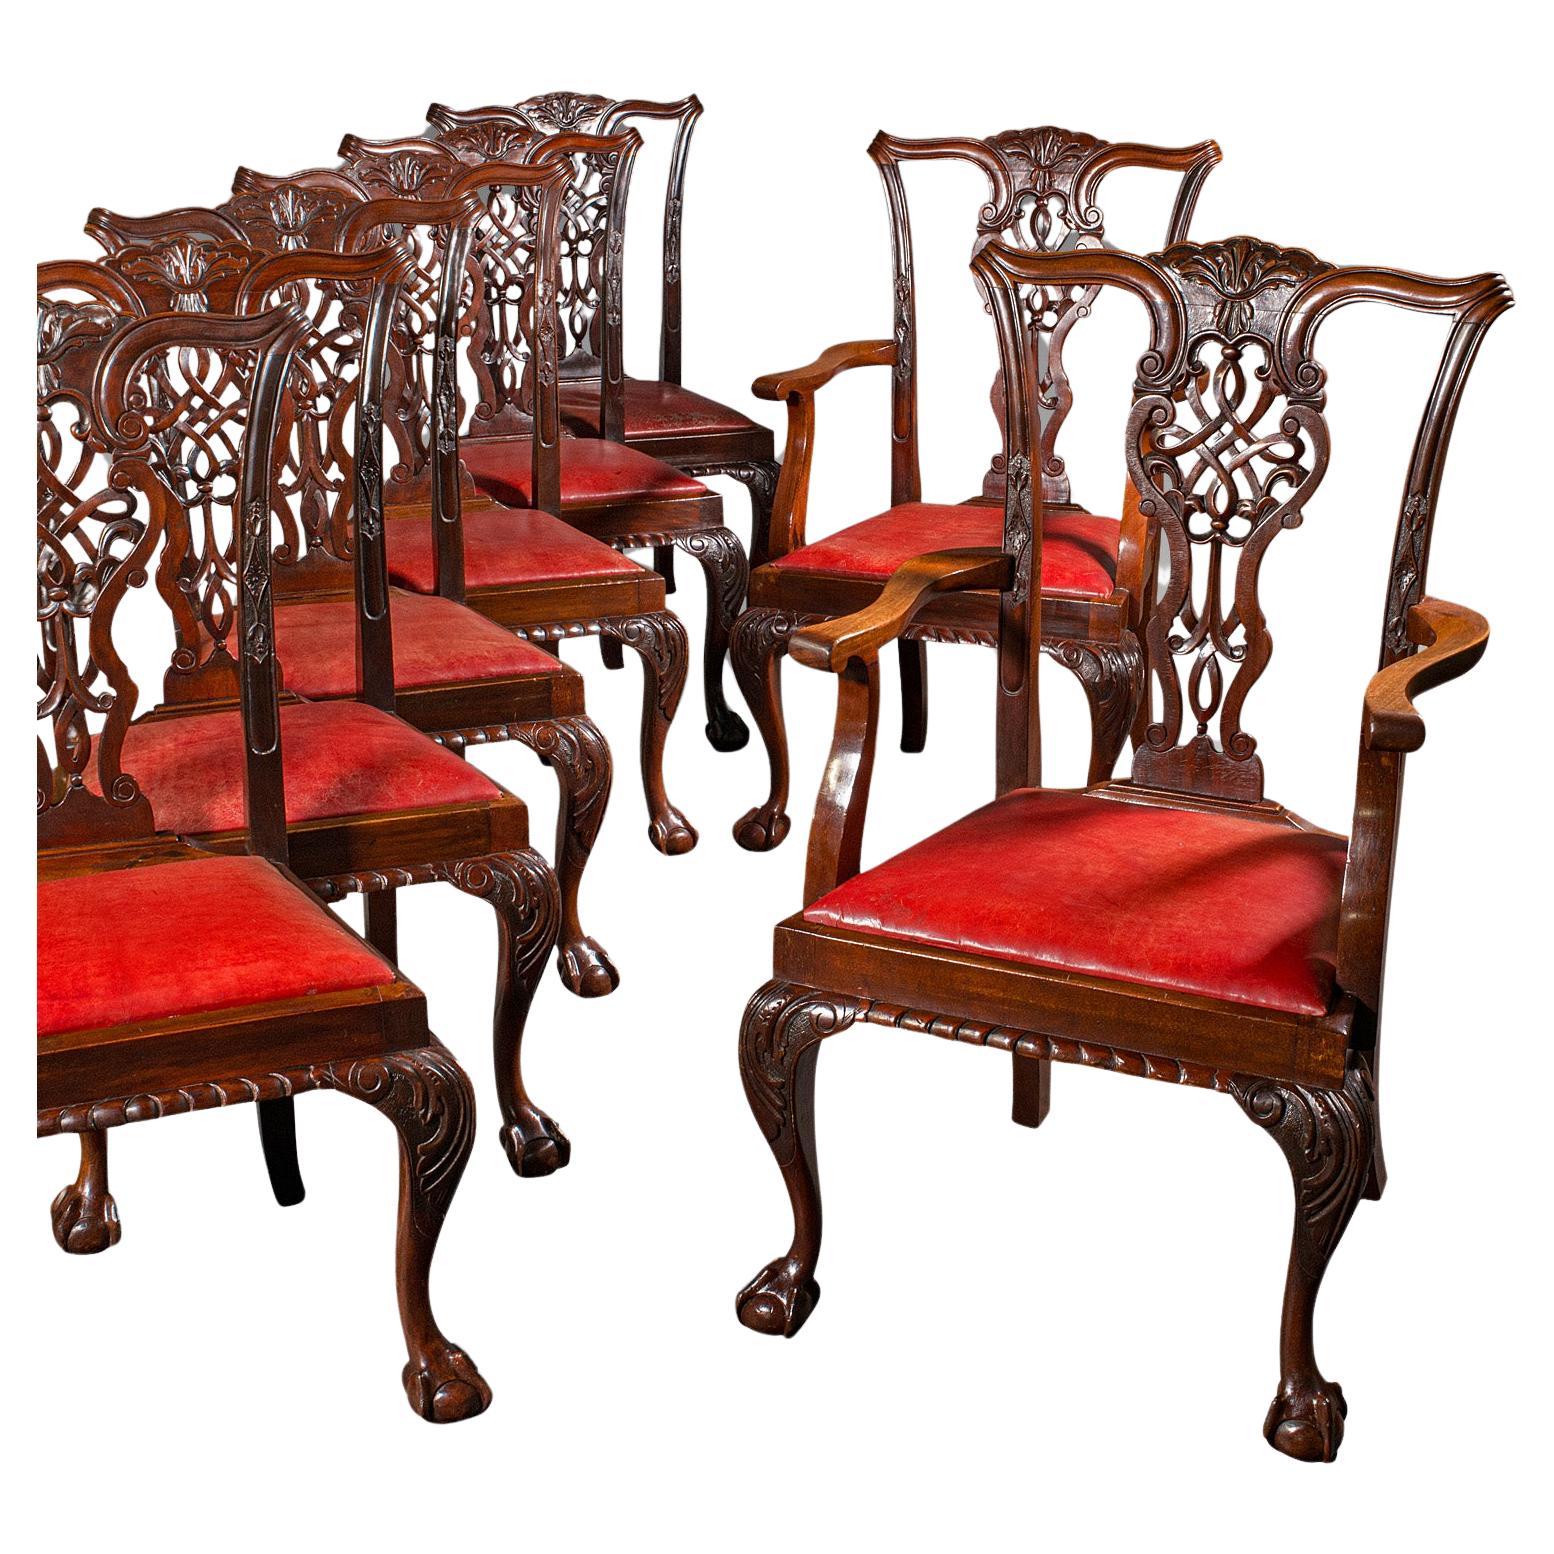 Set Of 8 Antique Dining Chairs, English, Leather, Chippendale Revival, Victorian